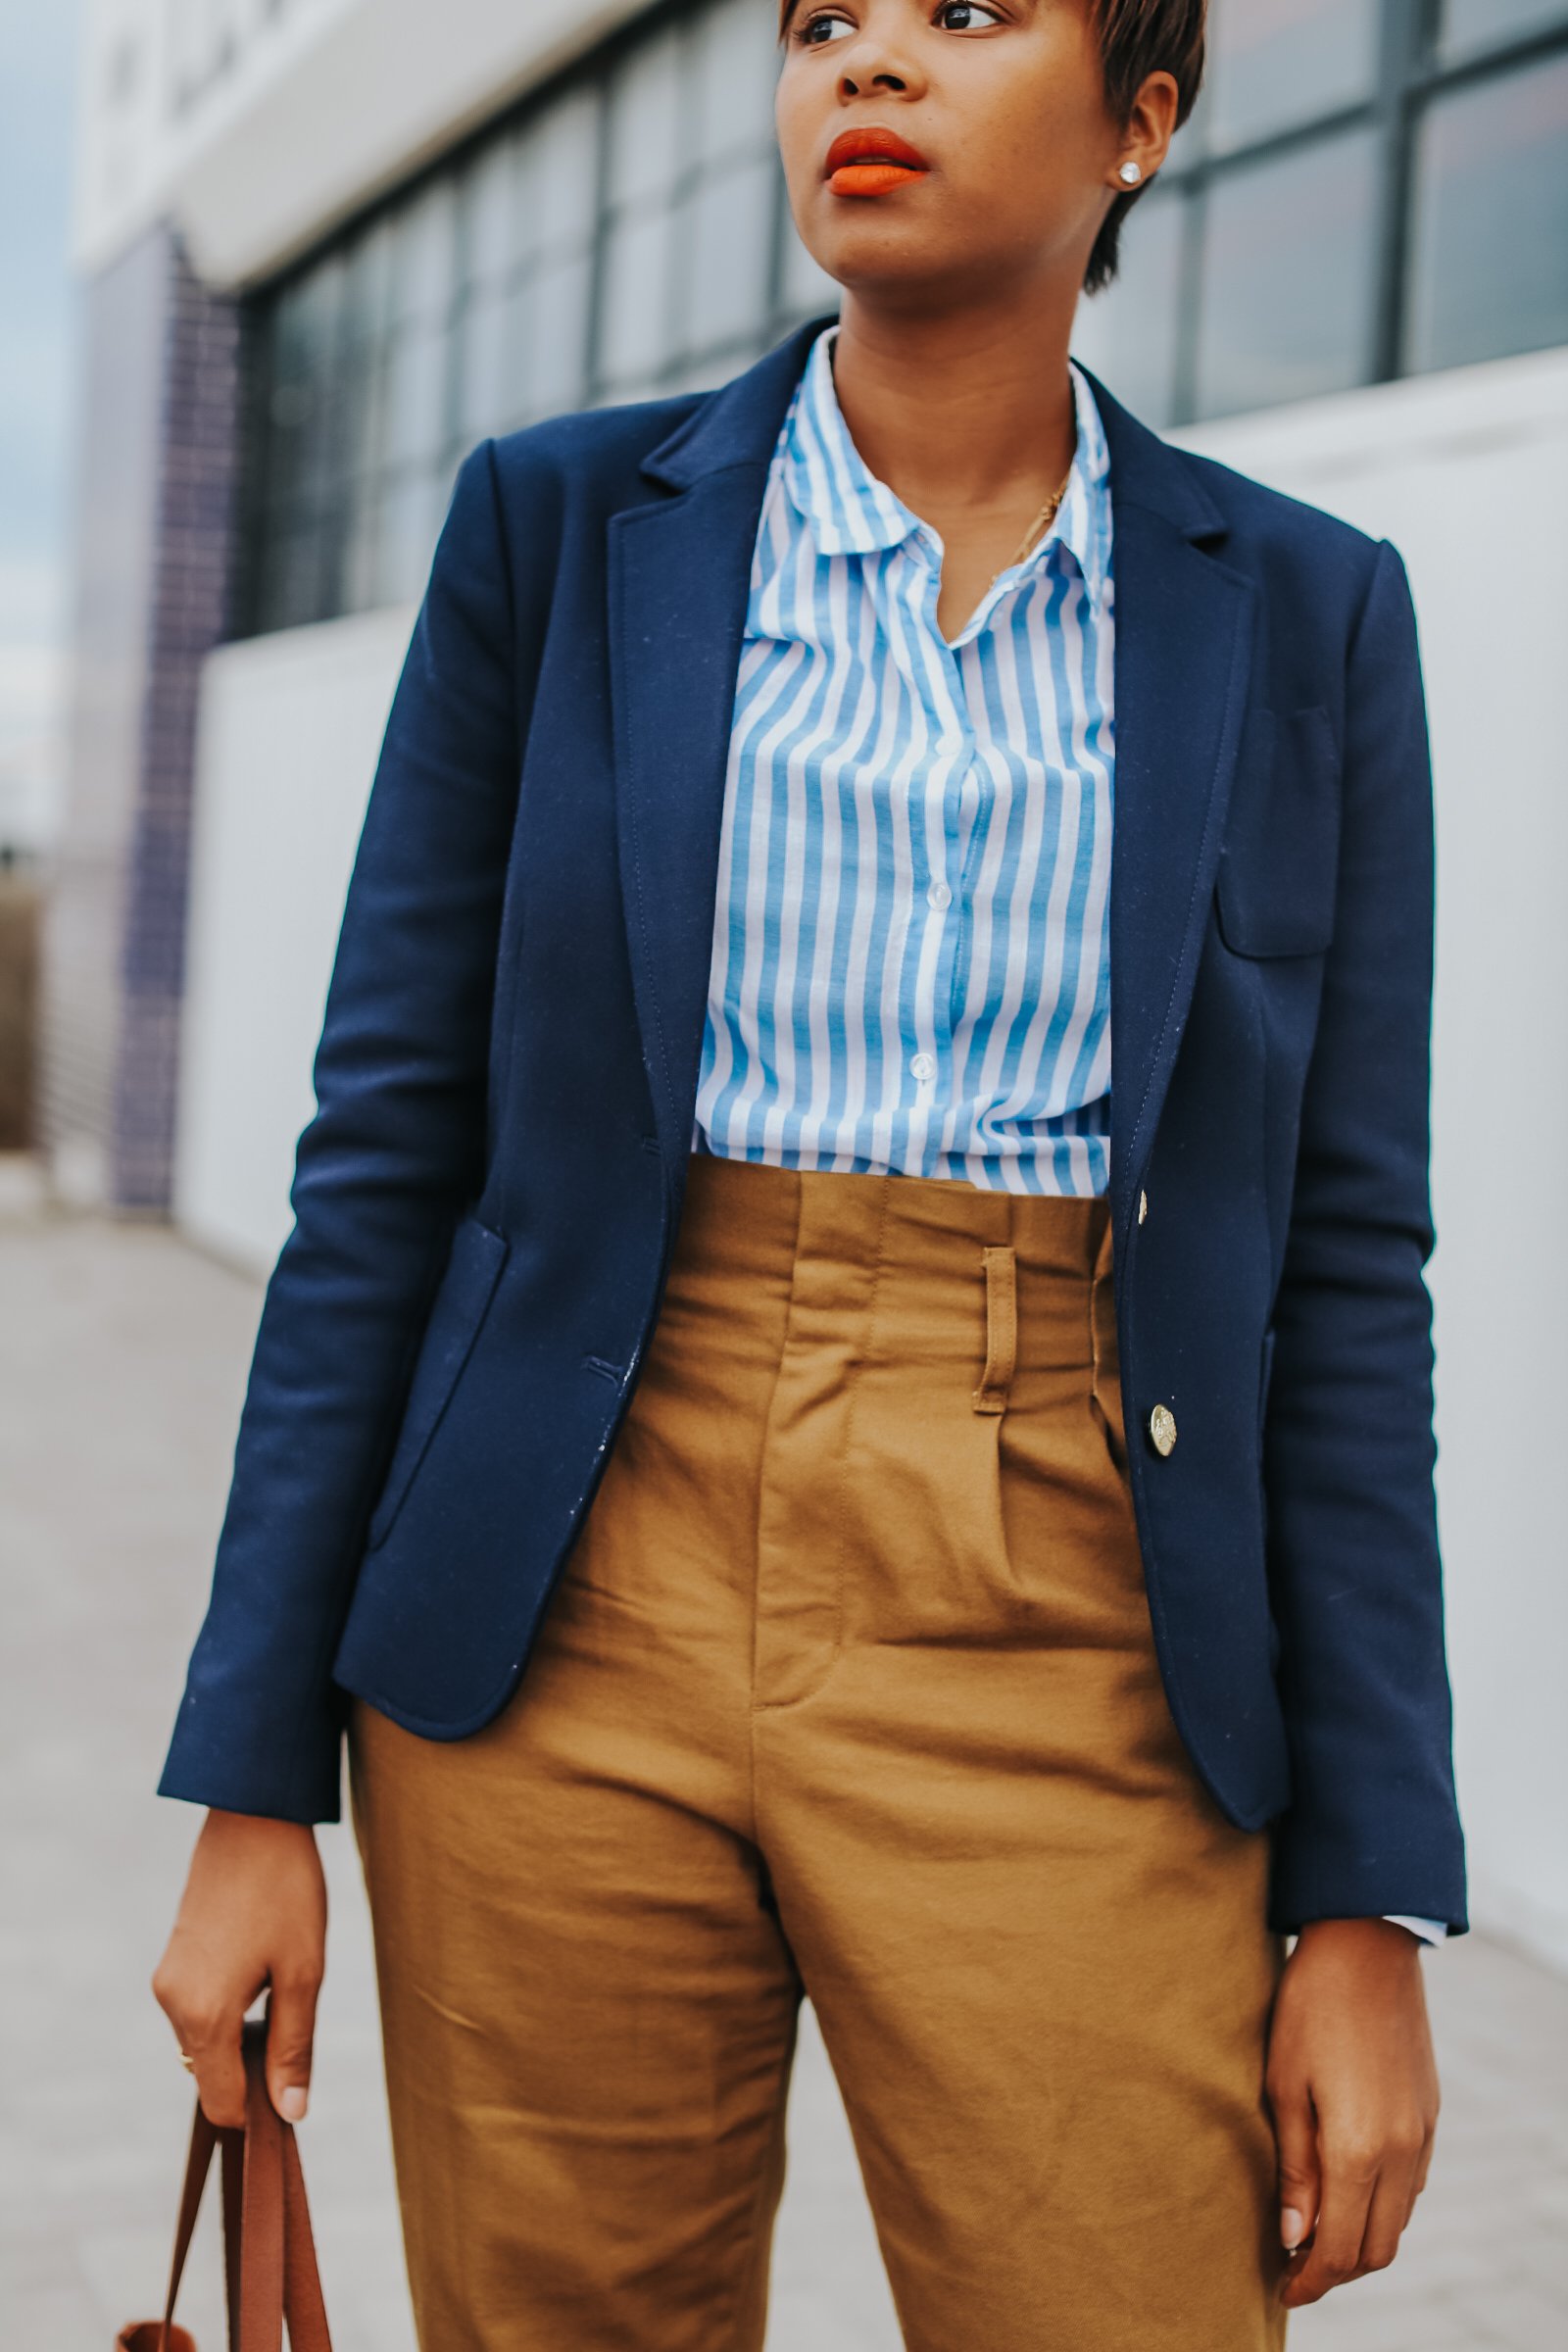 Mary's Little Way in A Navy Blazer, a Blue and White Striped Boyfriend Shirt, Mustard Yellow Paperboy Pants, and Brown Block Heels